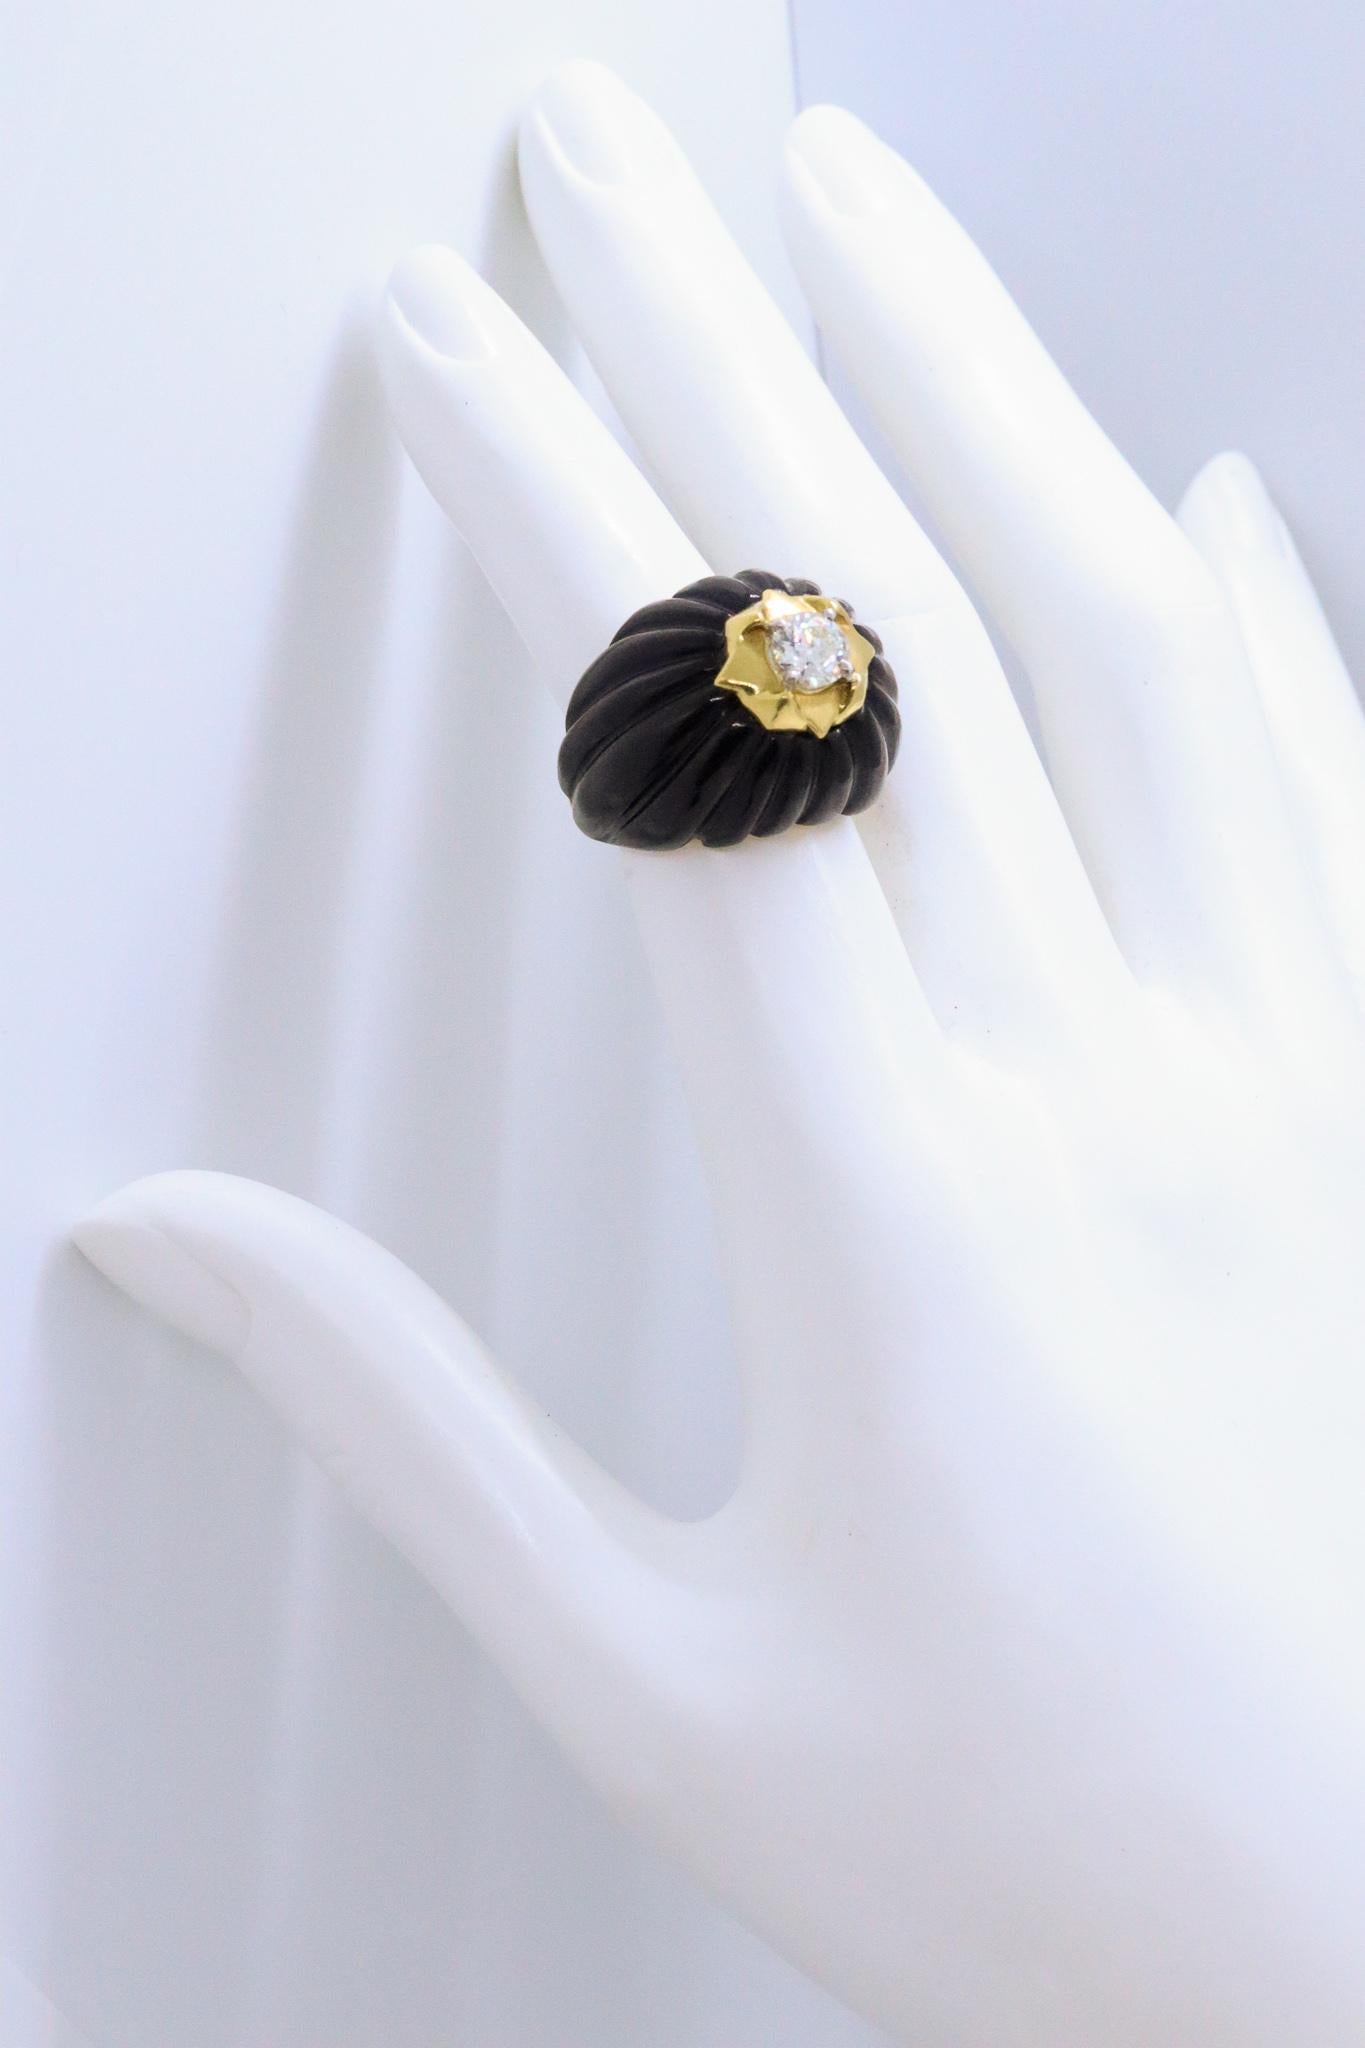 French Art-deco bombe cocktail ring.

Beautiful piece made in Paris France during the post war period, circa 1950. Finely crafted in 18 karat yellow gold with a .950 platinum top. Is mounted with a fluted cabochon cut carved from natural black onyx.